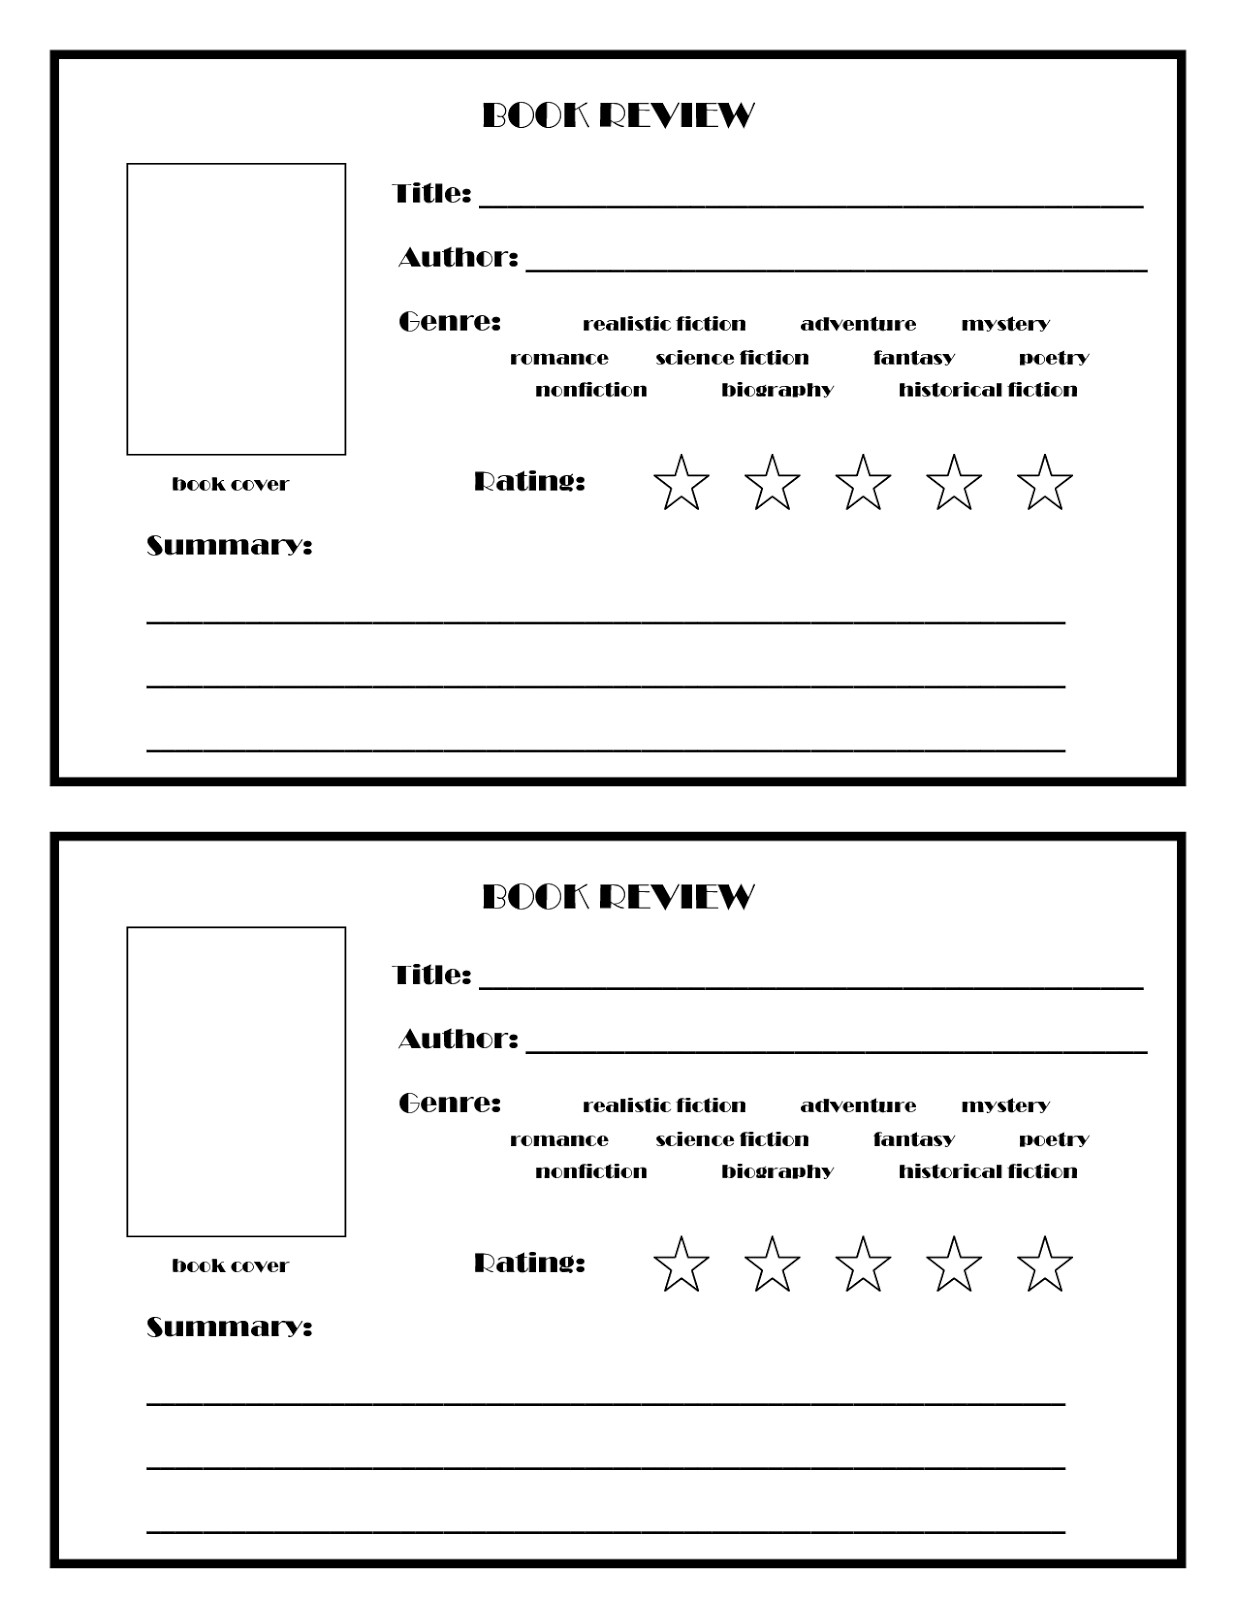 book-review-form-printable-printable-forms-free-online